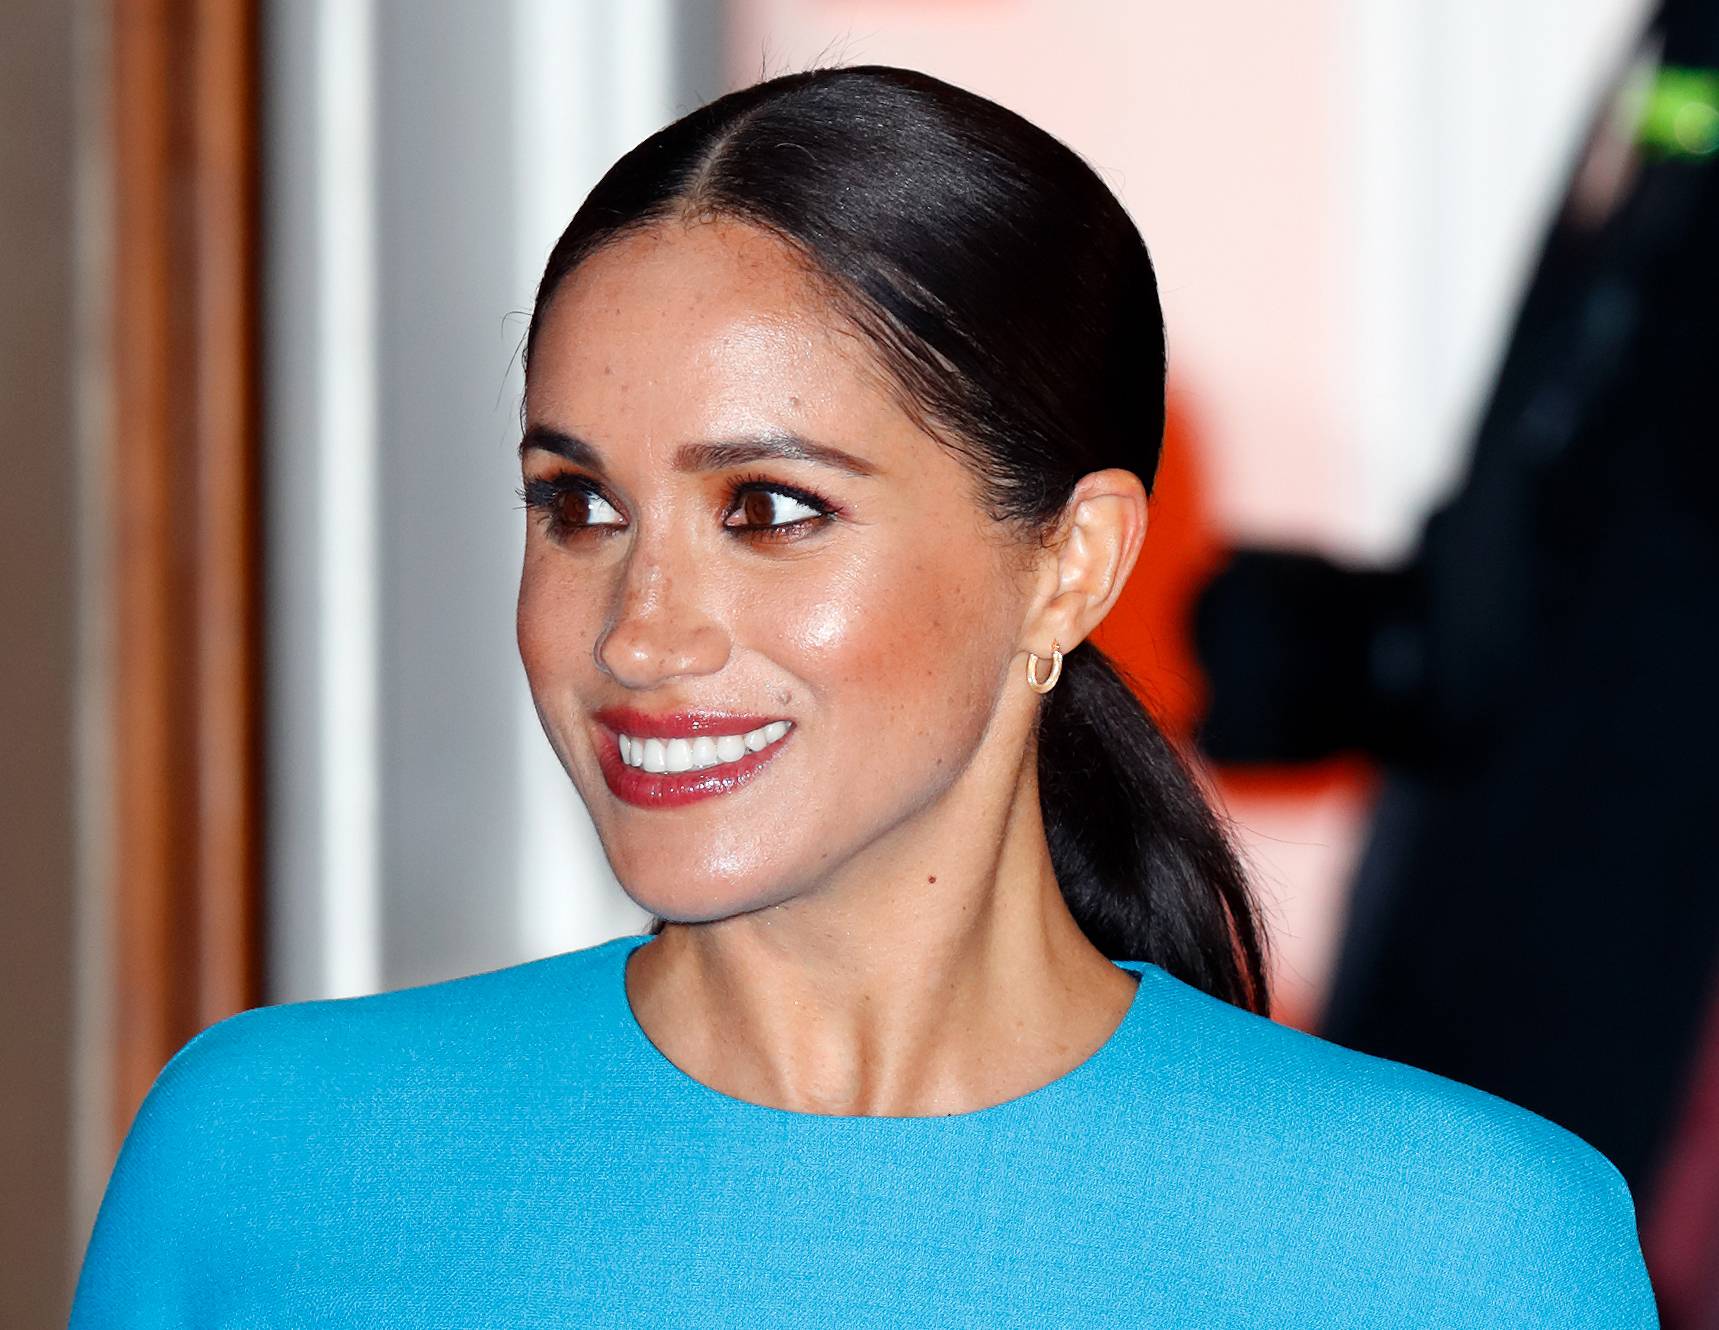 LONDON, UNITED KINGDOM - MARCH 05: (EMBARGOED FOR PUBLICATION IN UK NEWSPAPERS UNTIL 24 HOURS AFTER CREATE DATE AND TIME) Meghan, Duchess of Sussex attends The Endeavour Fund Awards at Mansion House on March 5, 2020 in London, England. (Photo by Max Mumby/Indigo/Getty Images)